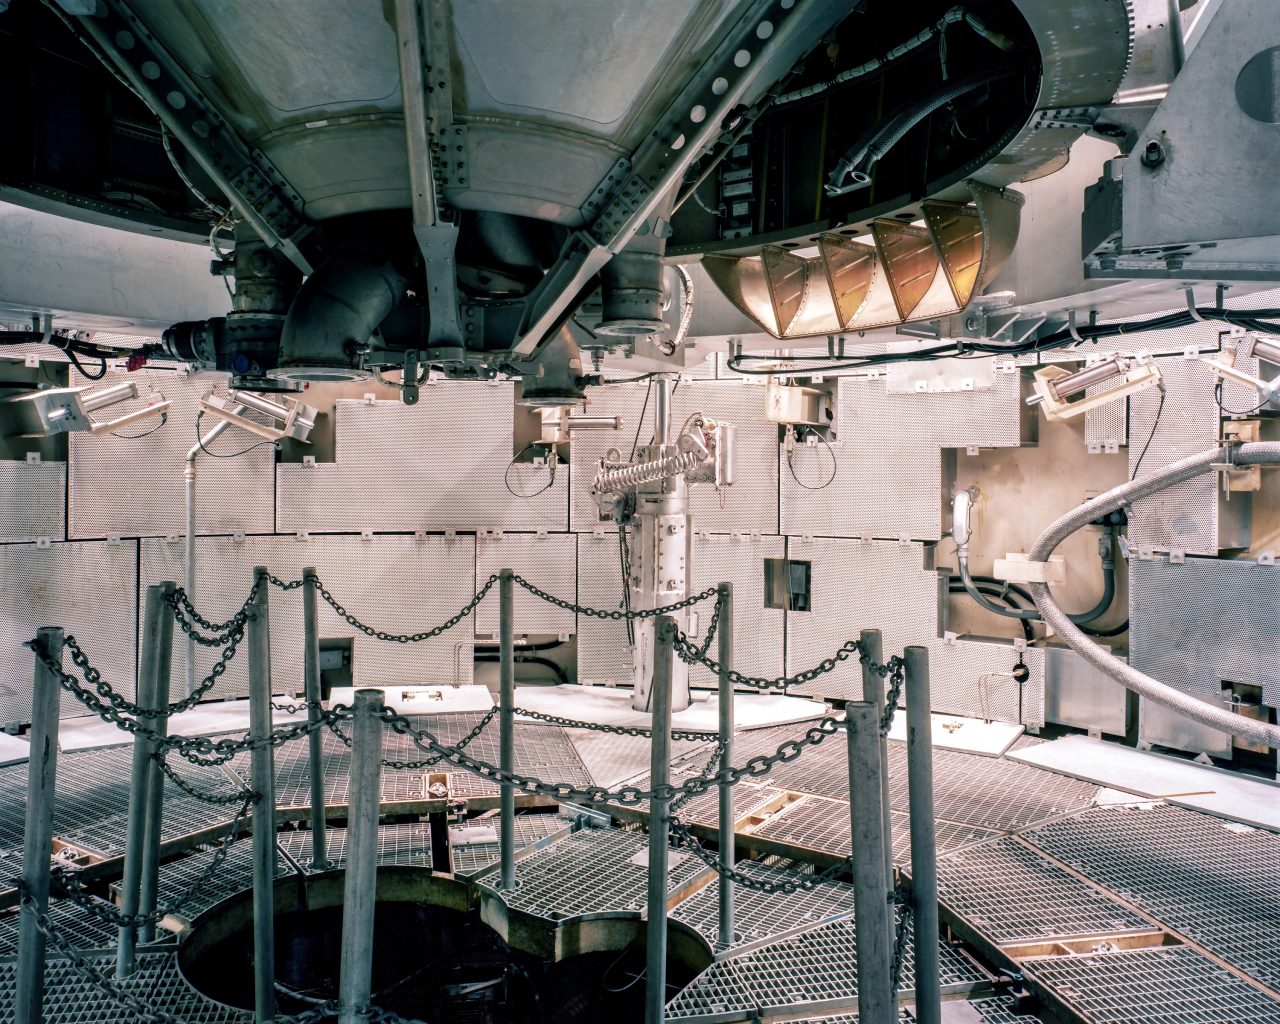 First-stage engine of a Titan II intercontinental ballistic missile as seen